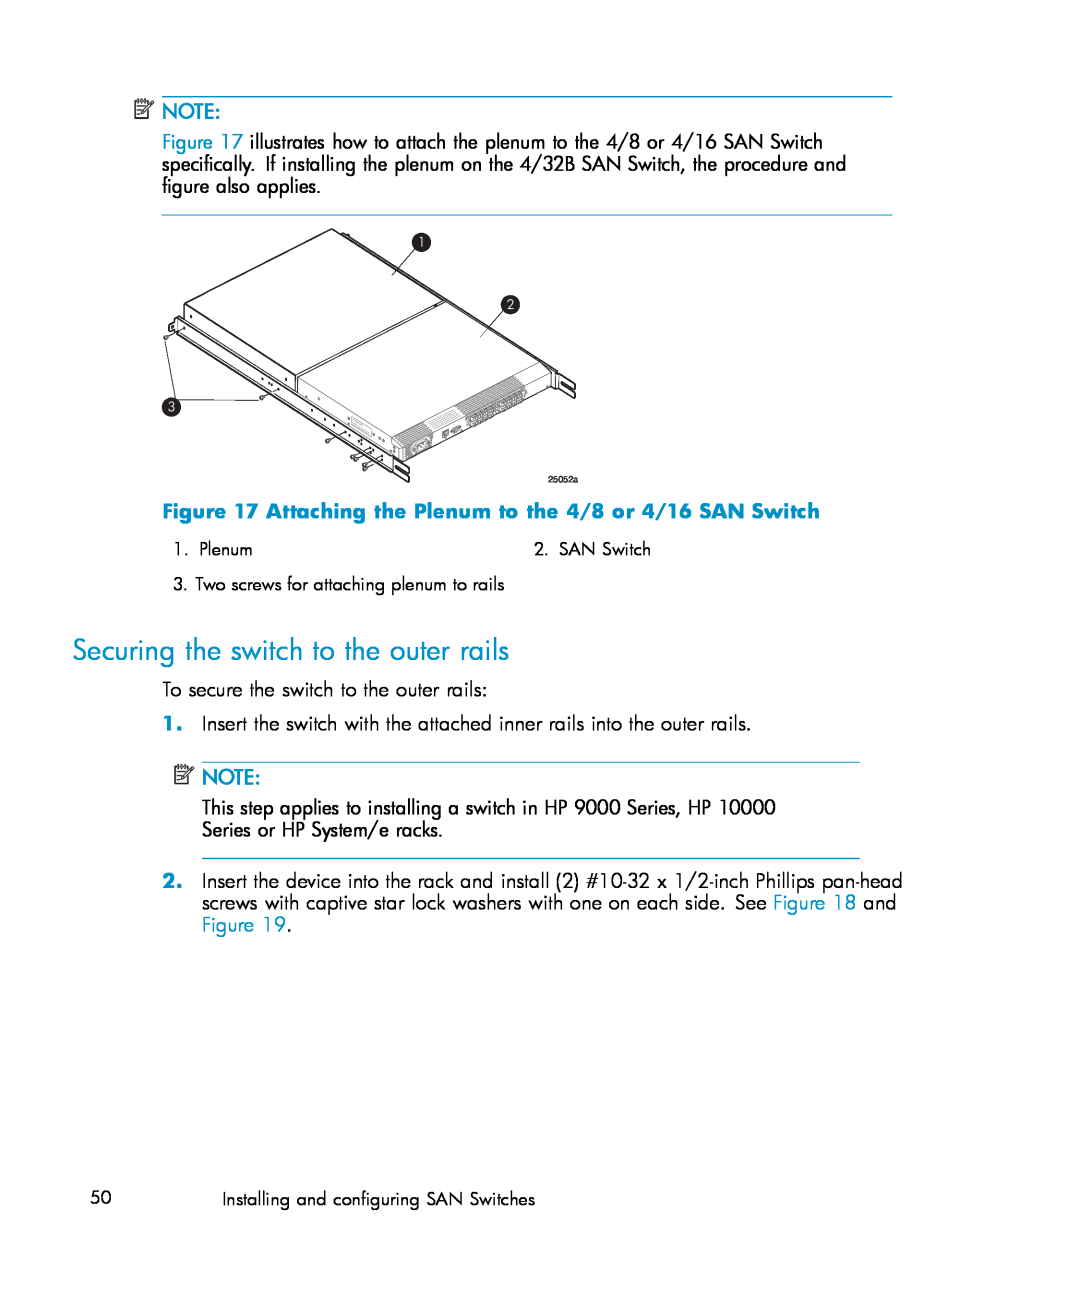 IBM AA-RWF3A-TE manual Securing the switch to the outer rails, Attaching the Plenum to the 4/8 or 4/16 SAN Switch 